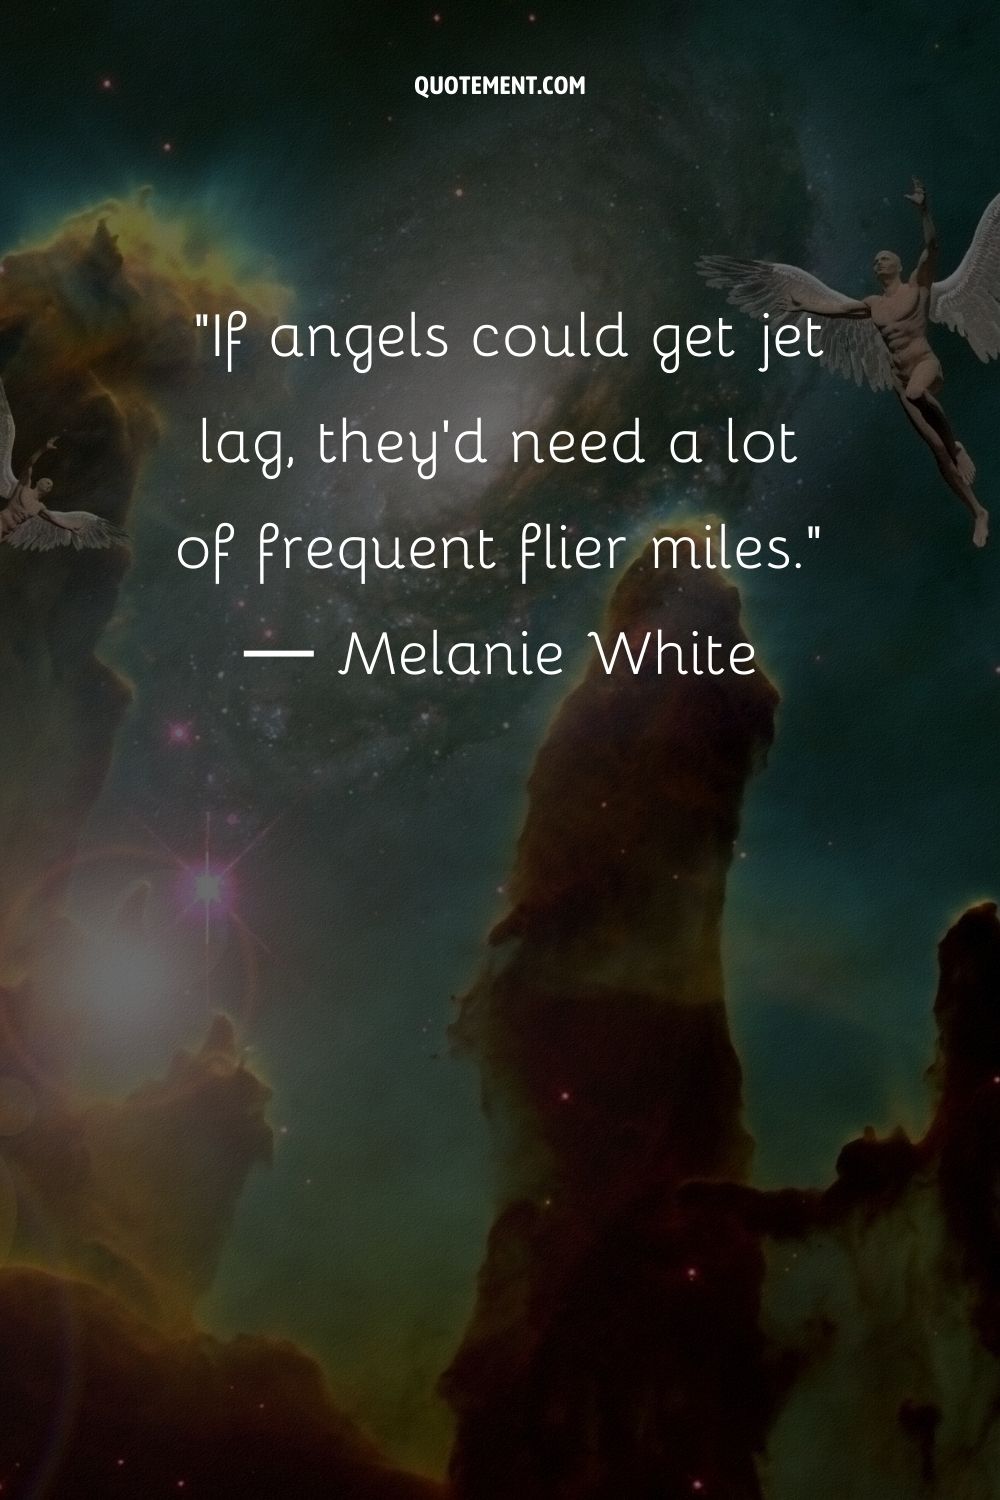 If angels could get jet lag, they'd need a lot of frequent flier miles.